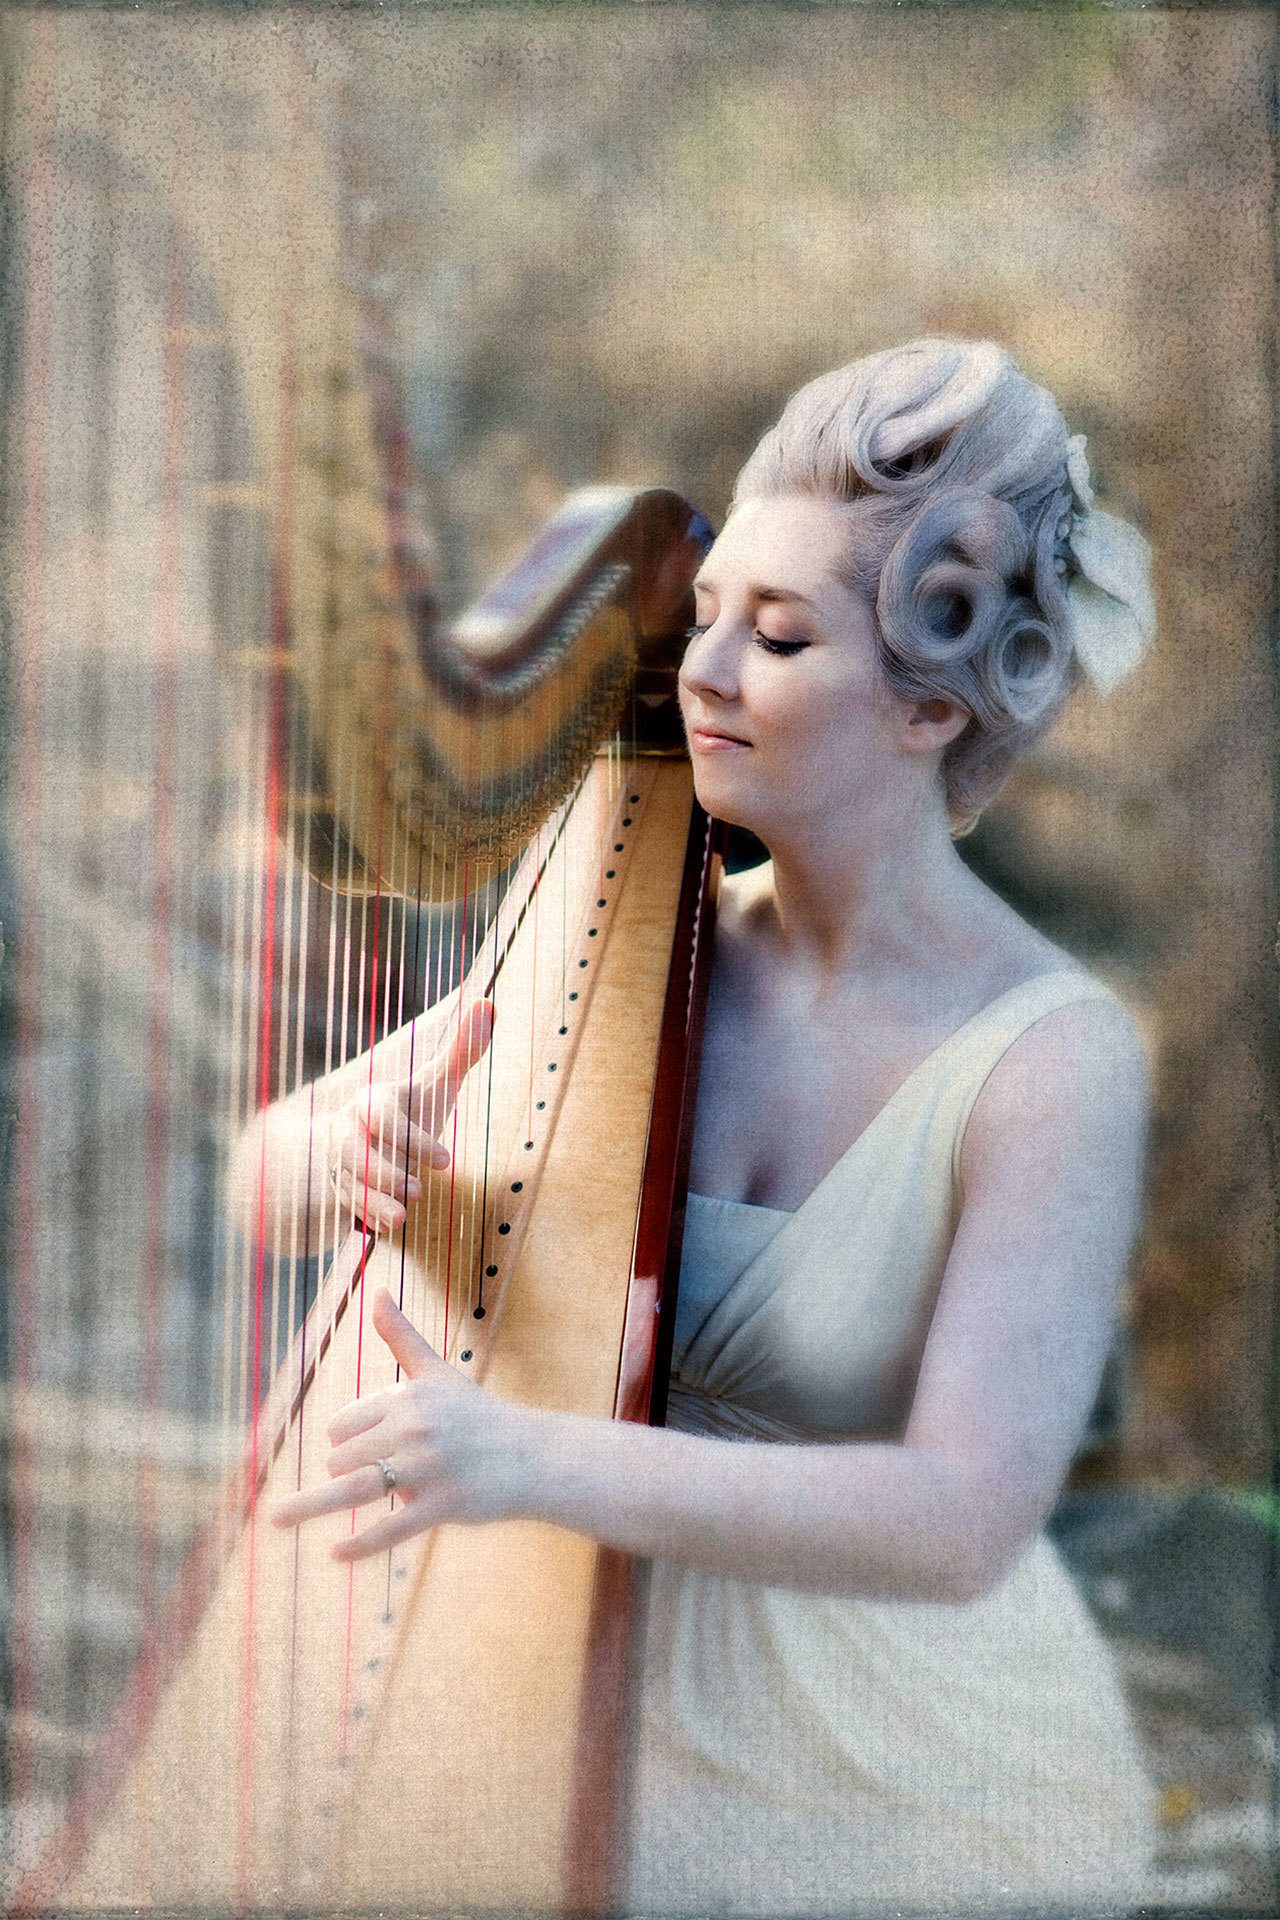 Harpist Megan Bledsoe Ward will be the featured performer during two Port Angeles Chamber Orchestra concerts this weekend in Port Angeles and Sequim.